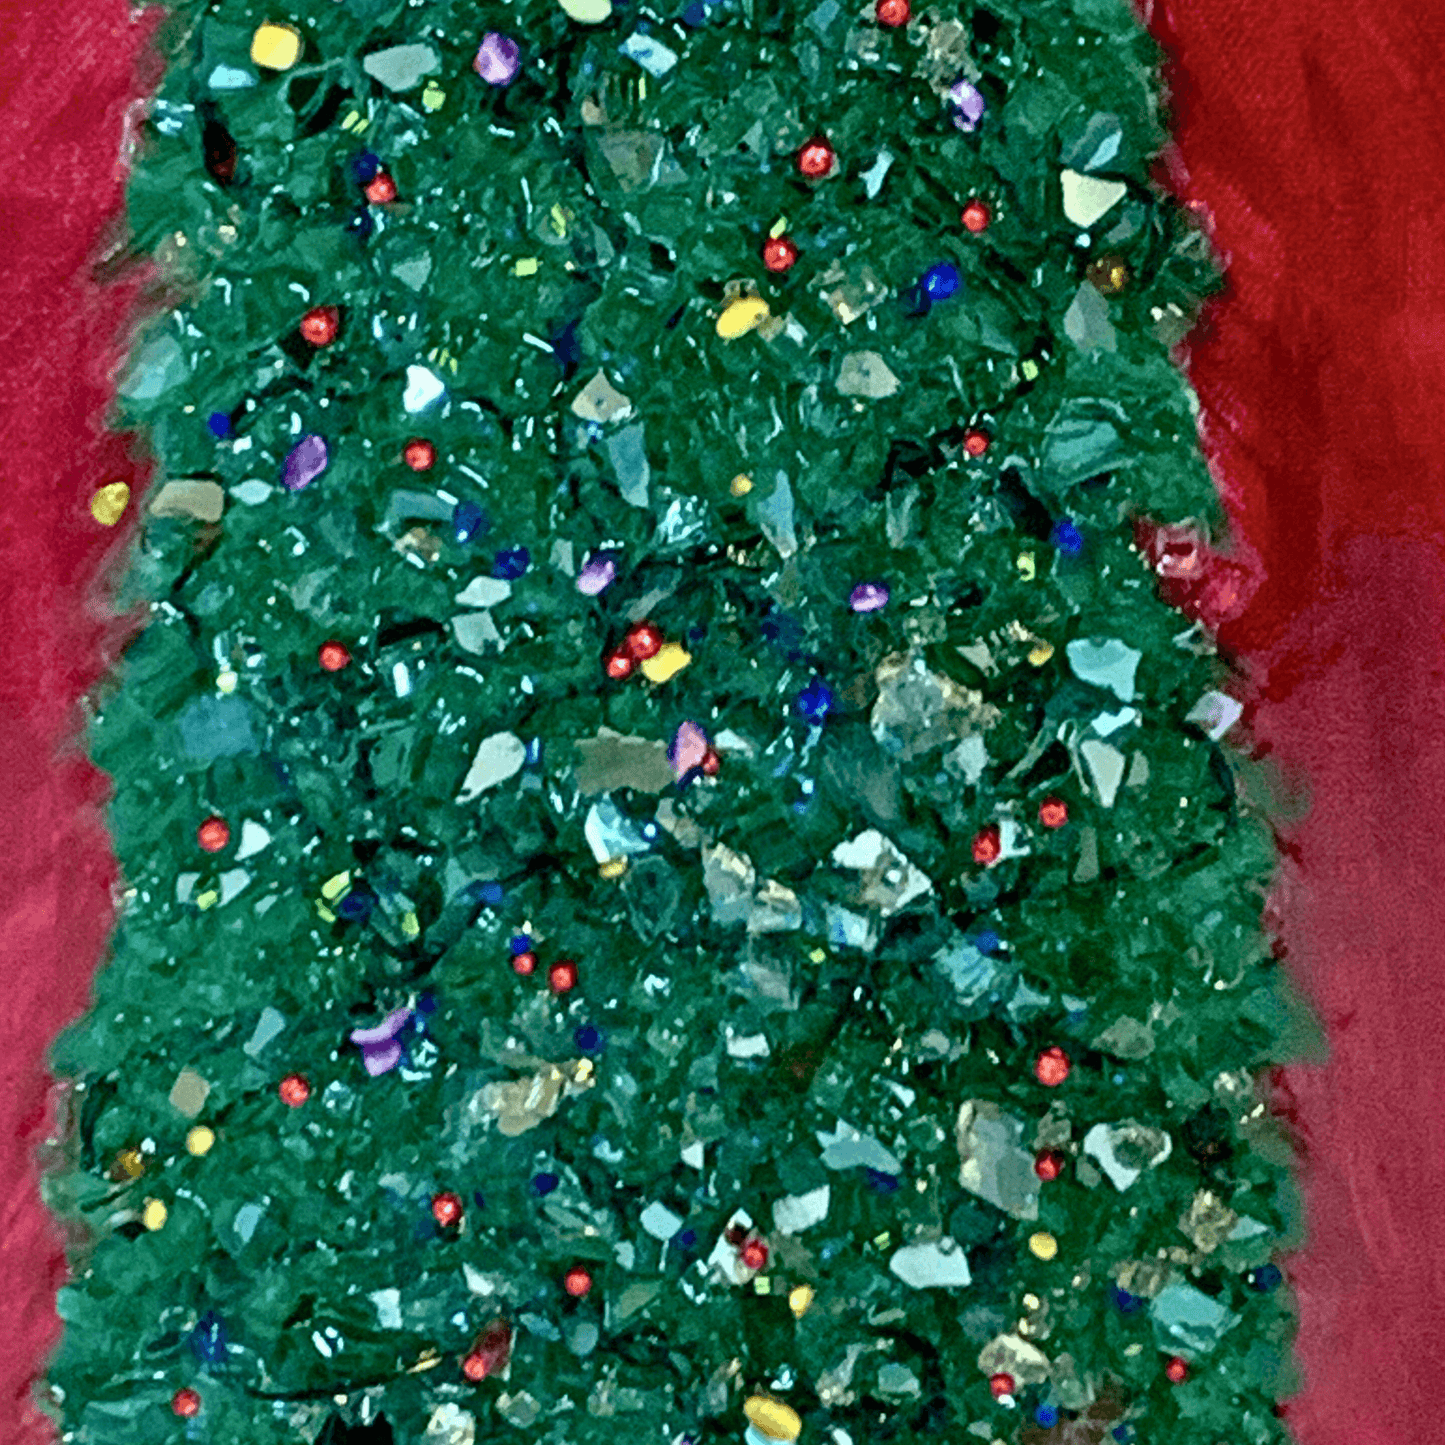 RED & GREEN TRADITIONAL CHRISTMAS TREE Mixed Media Modern Art